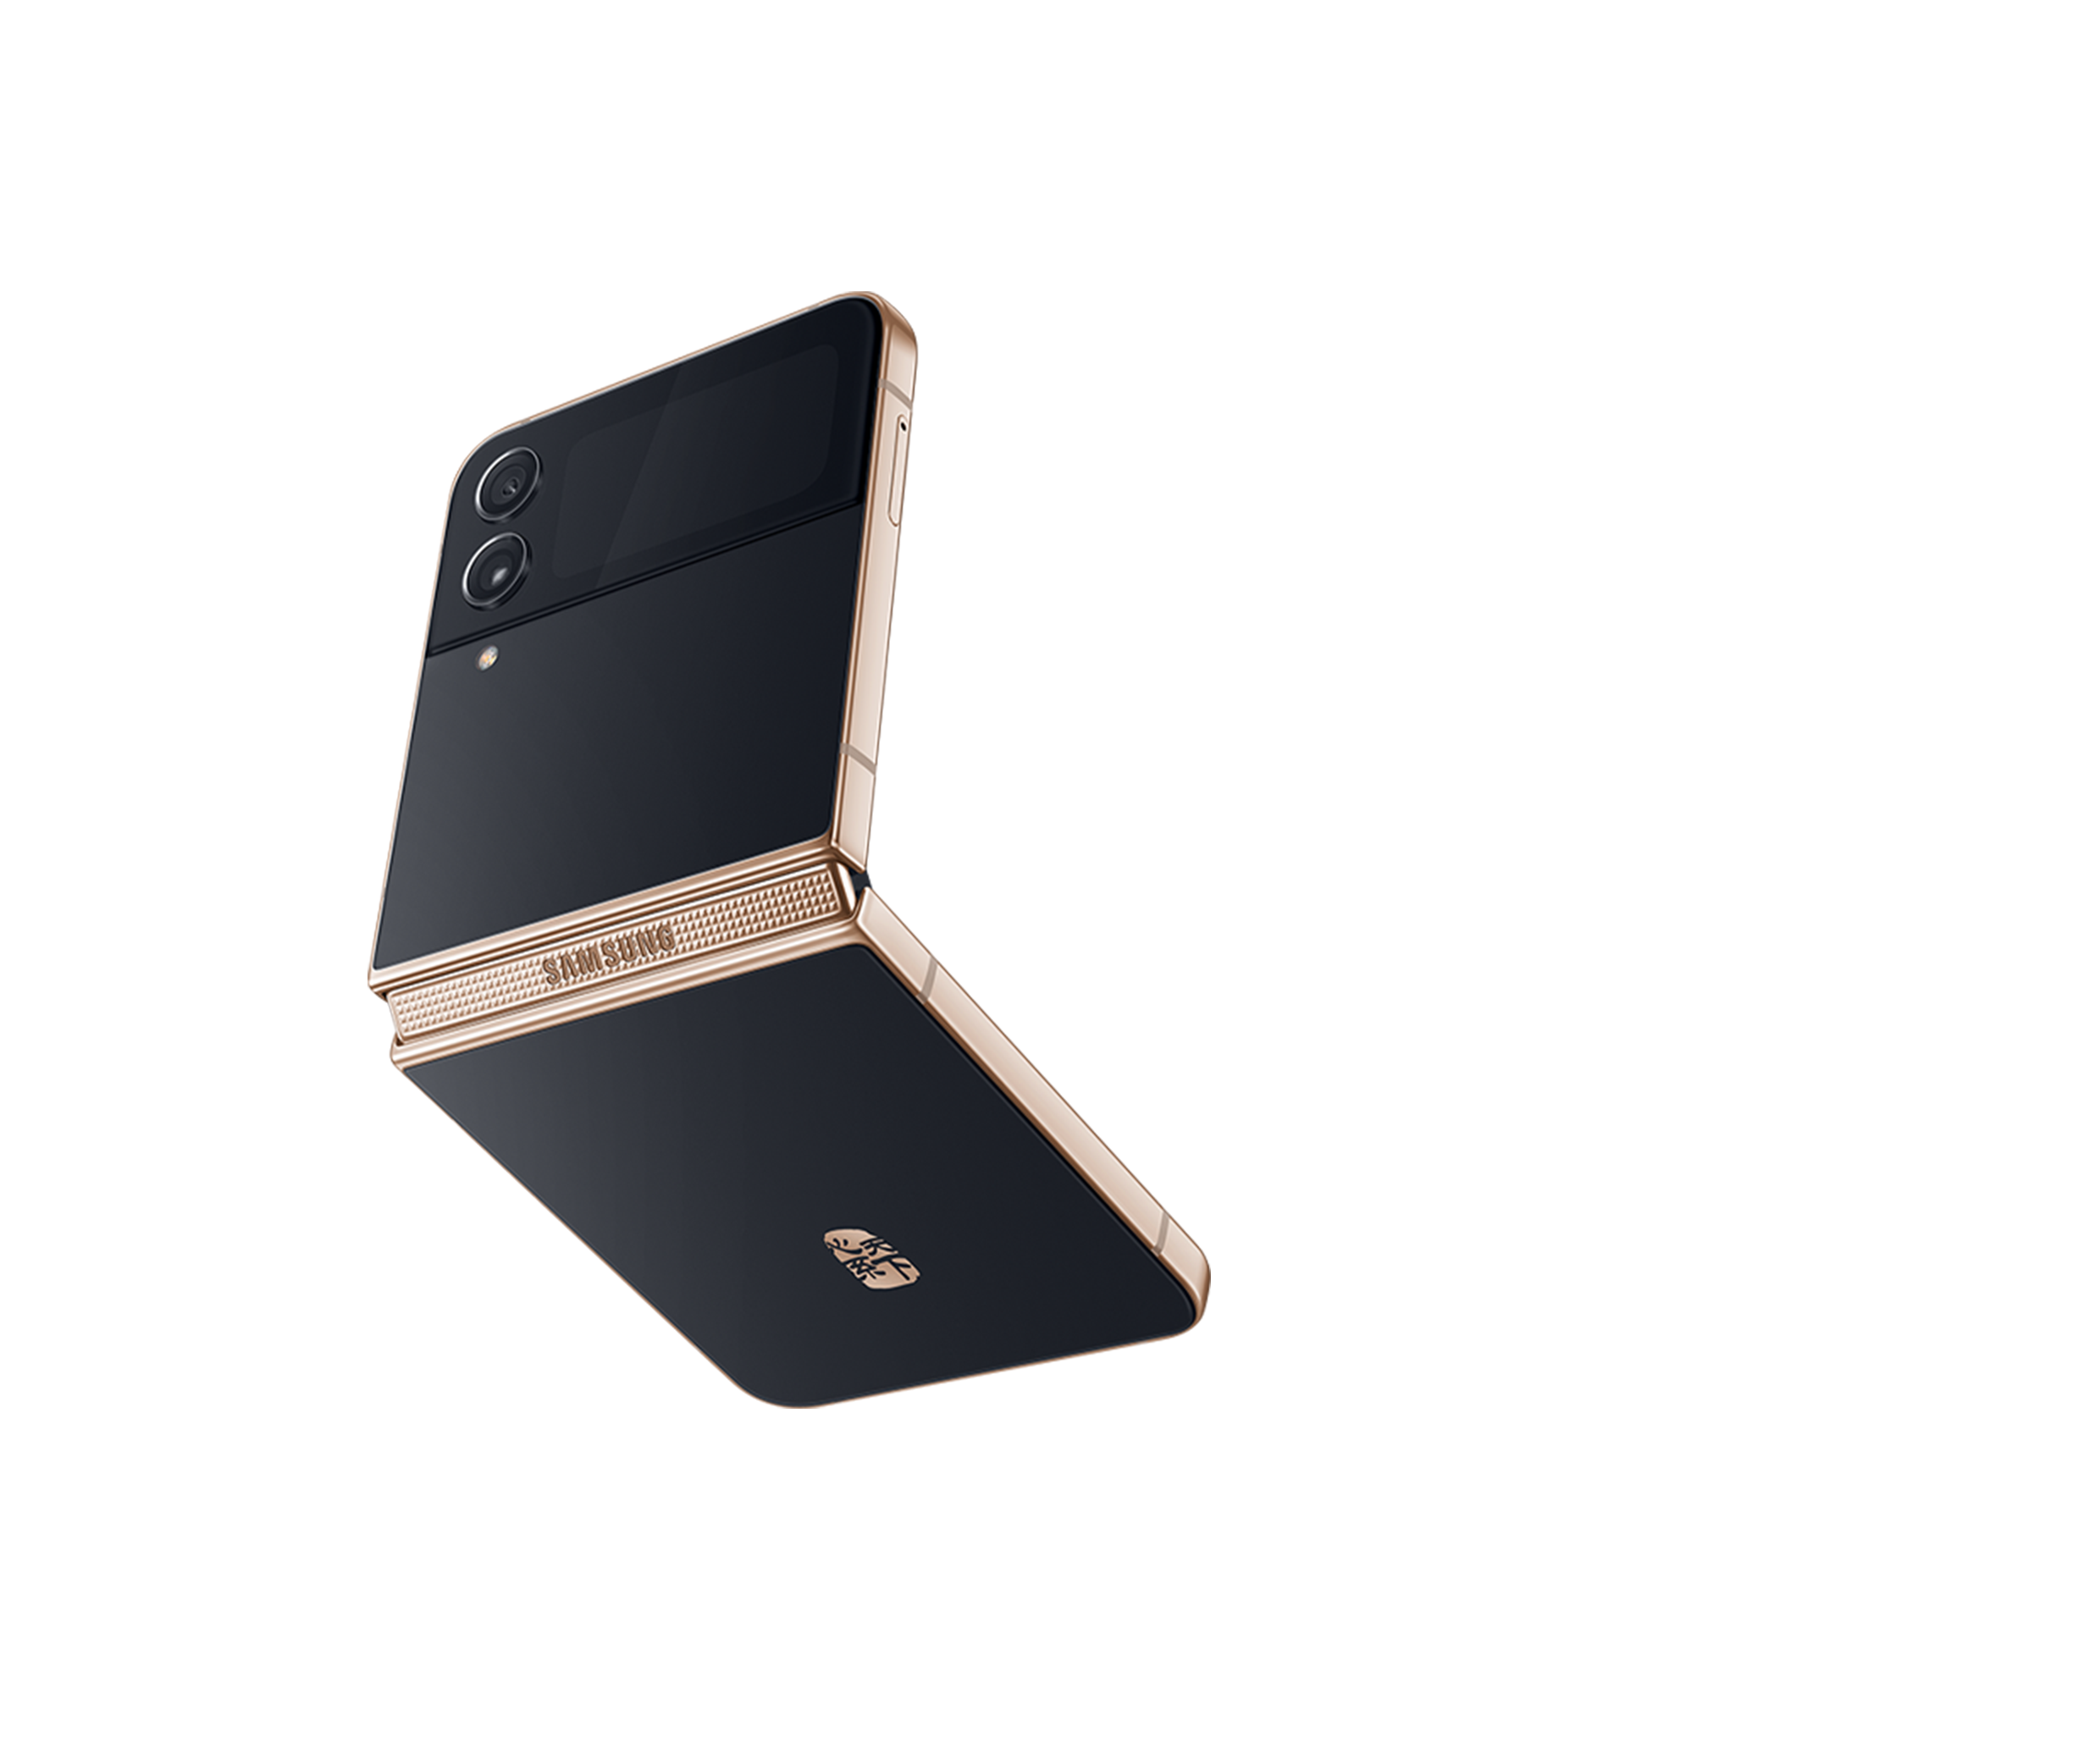 This is the product back image of W23 Flip.